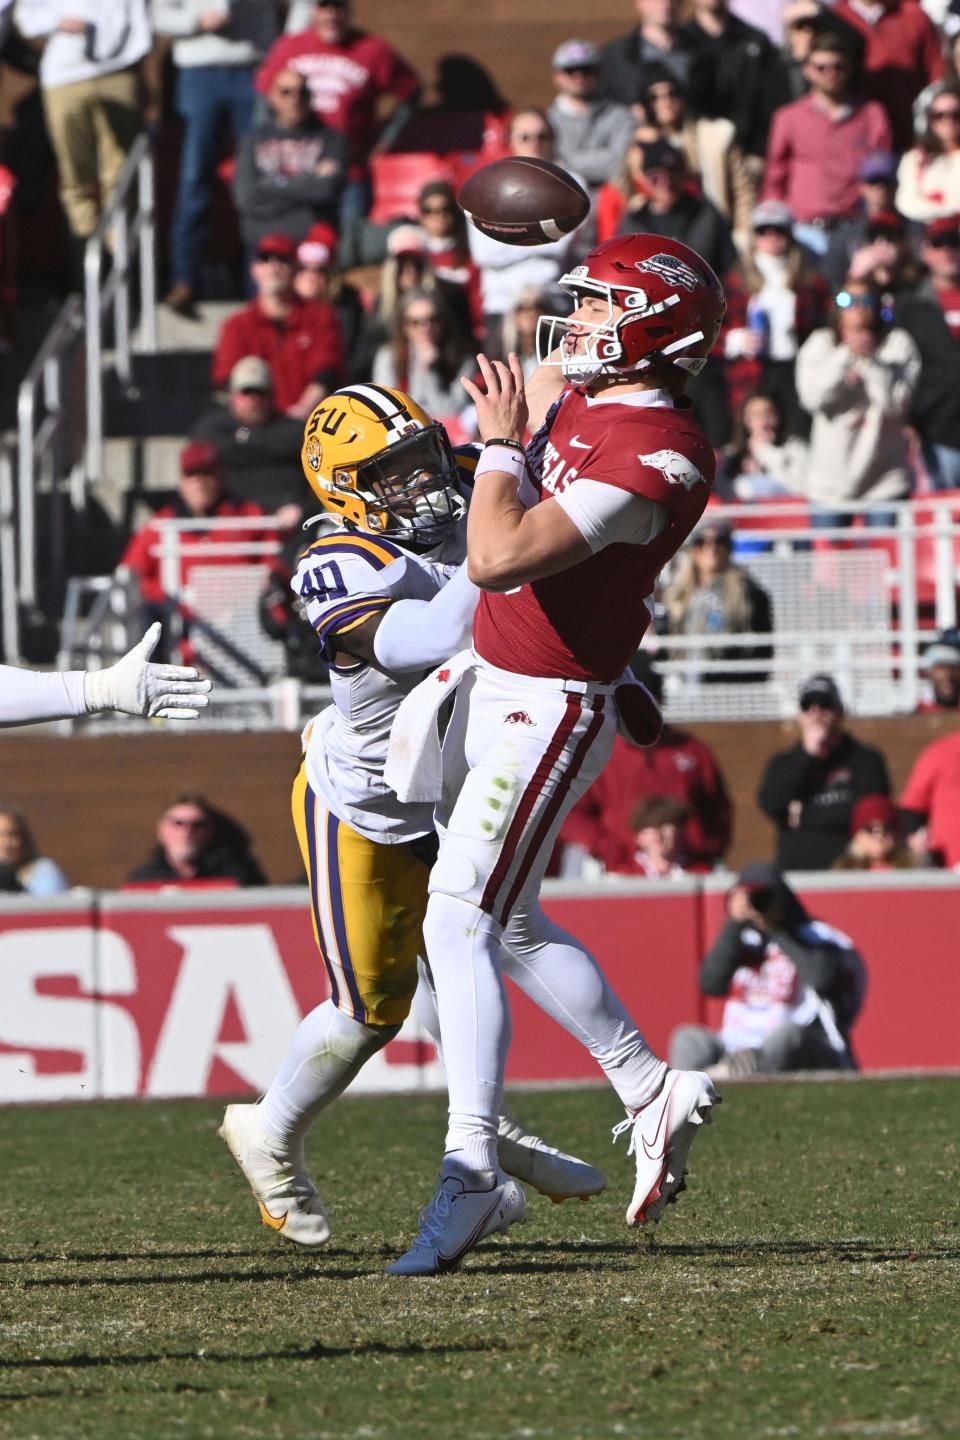 LSU linebacker Harold Perkins Jr. (40) knocks the ball away from Arkansas quarterback Cade Fortin (10) during the second half of an NCAA college football game Saturday, Nov. 12, 2022, in Fayetteville, Ark. The play was called a fumble and recovery by LSU but was reversed after officials reviewed the play. (AP Photo/Michael Woods)